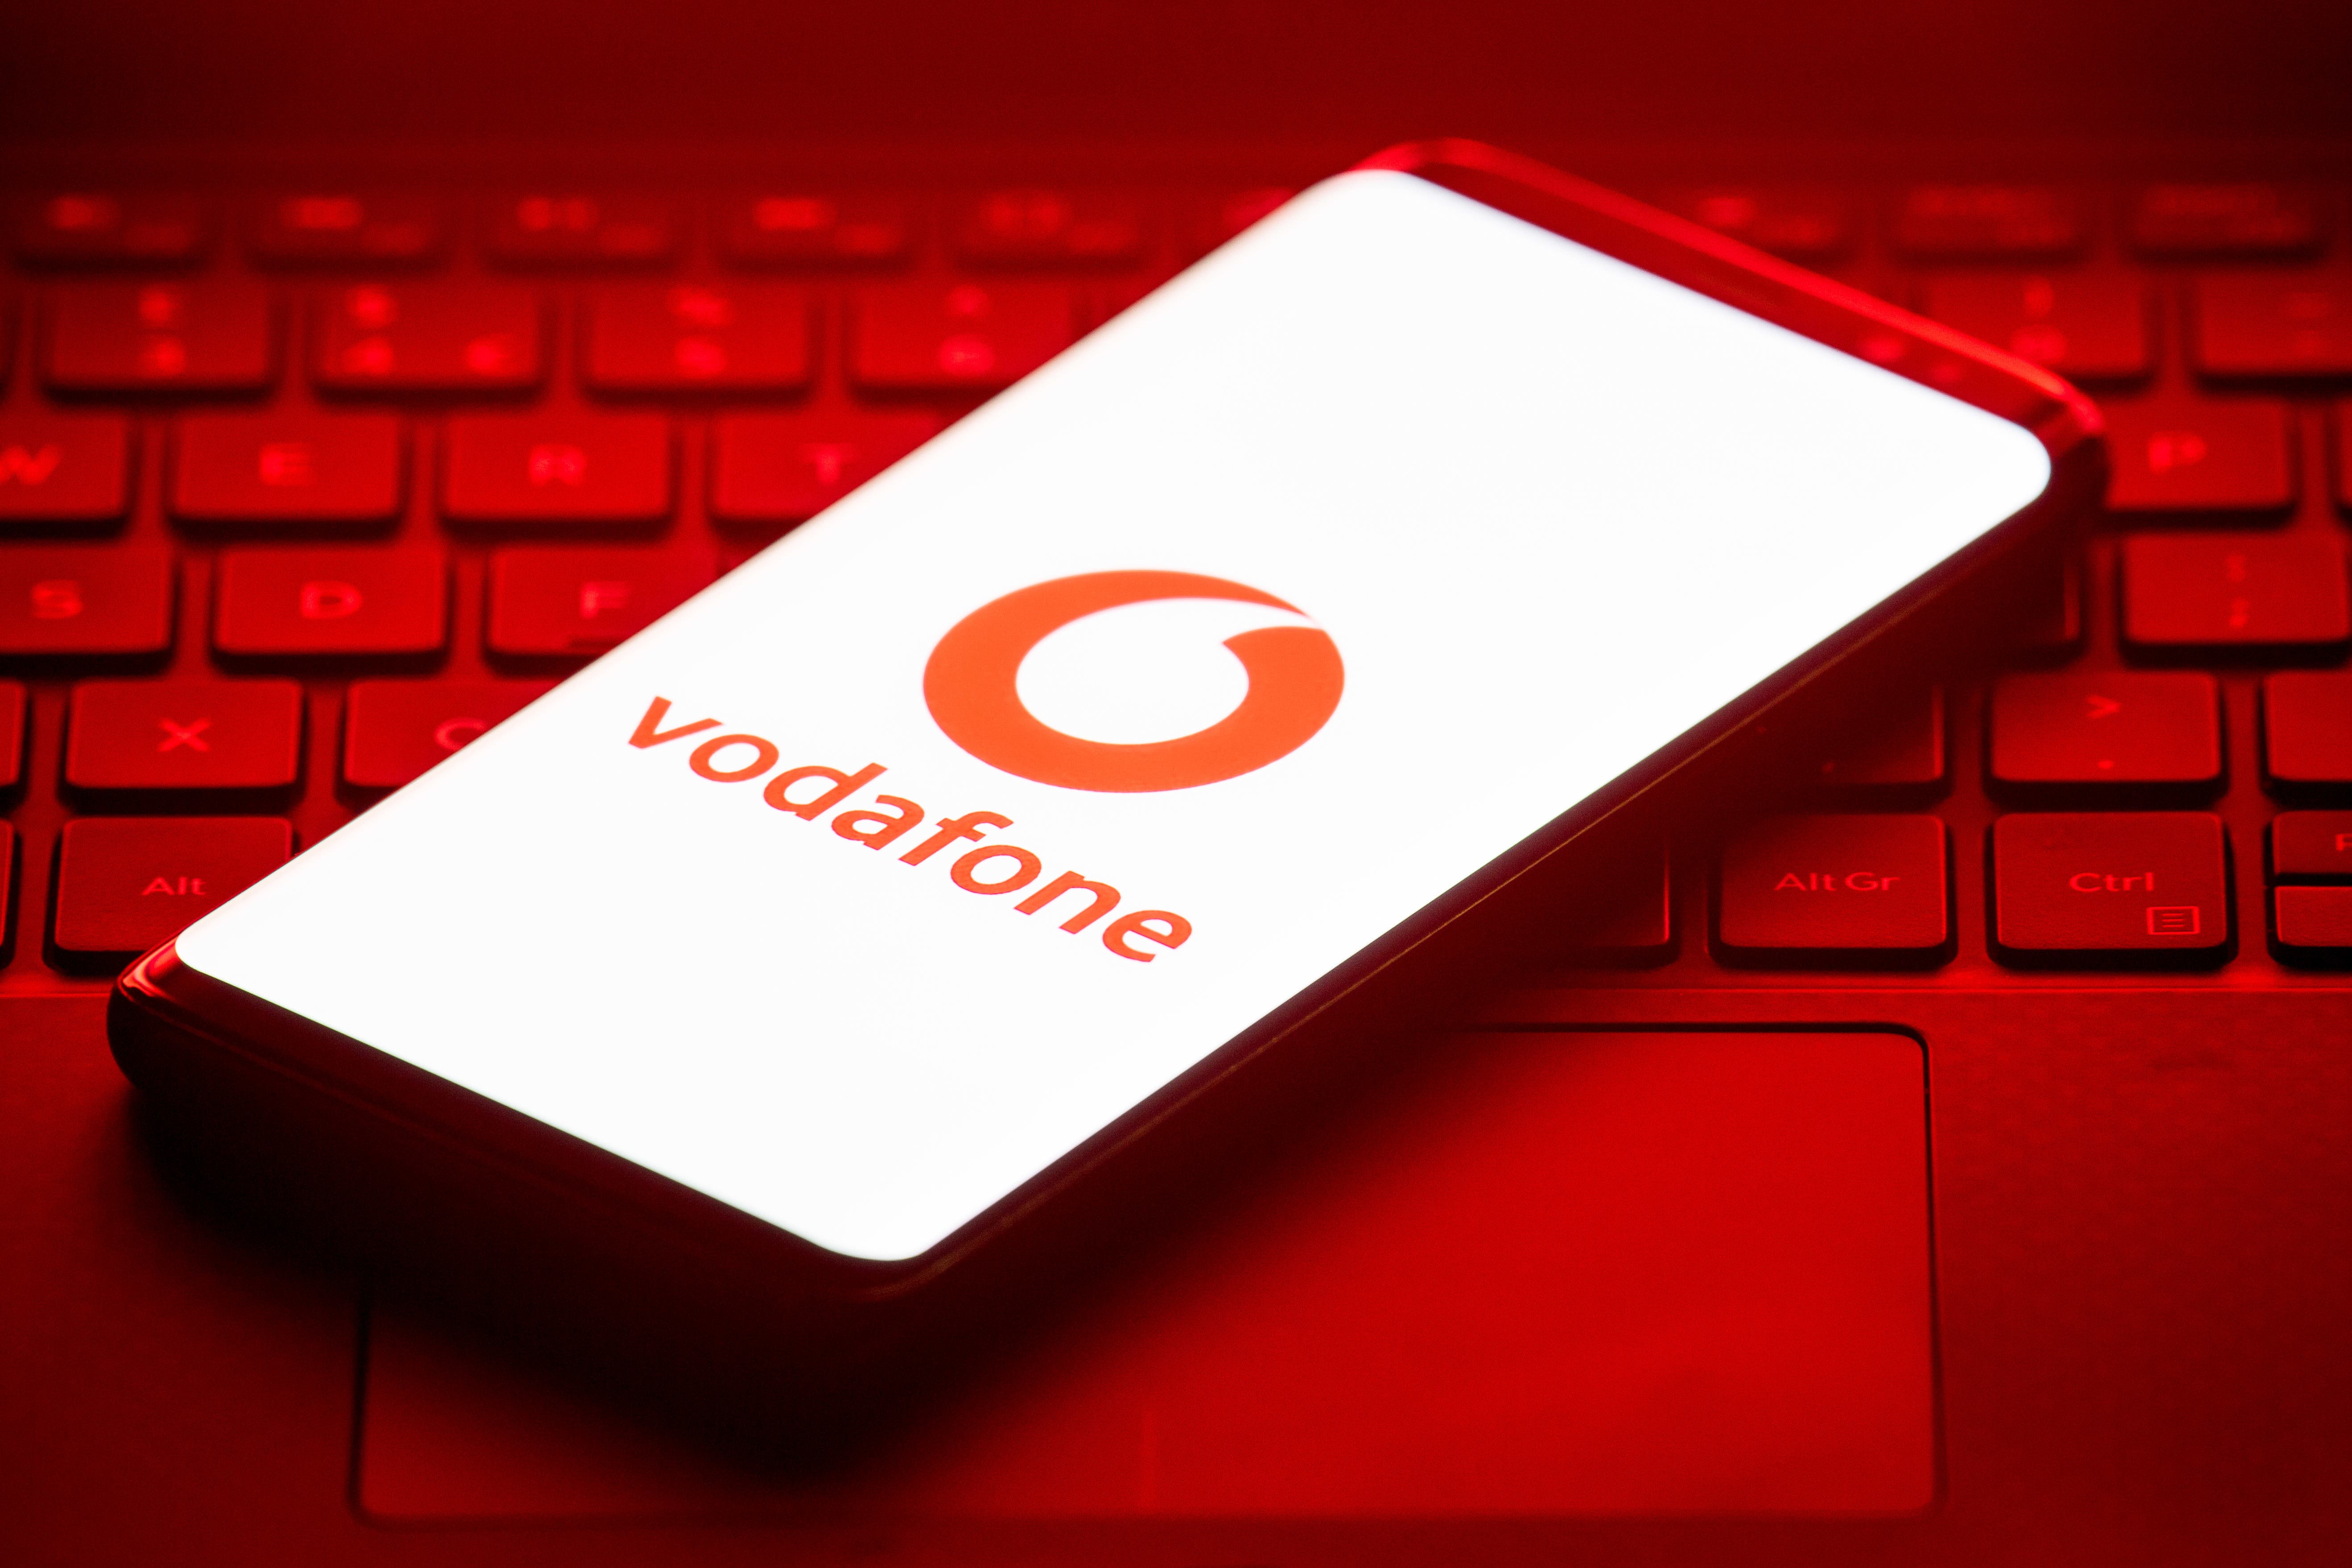 The deal will see the latest generative AI technology used to create chatbots to be used across Vodafone customer services